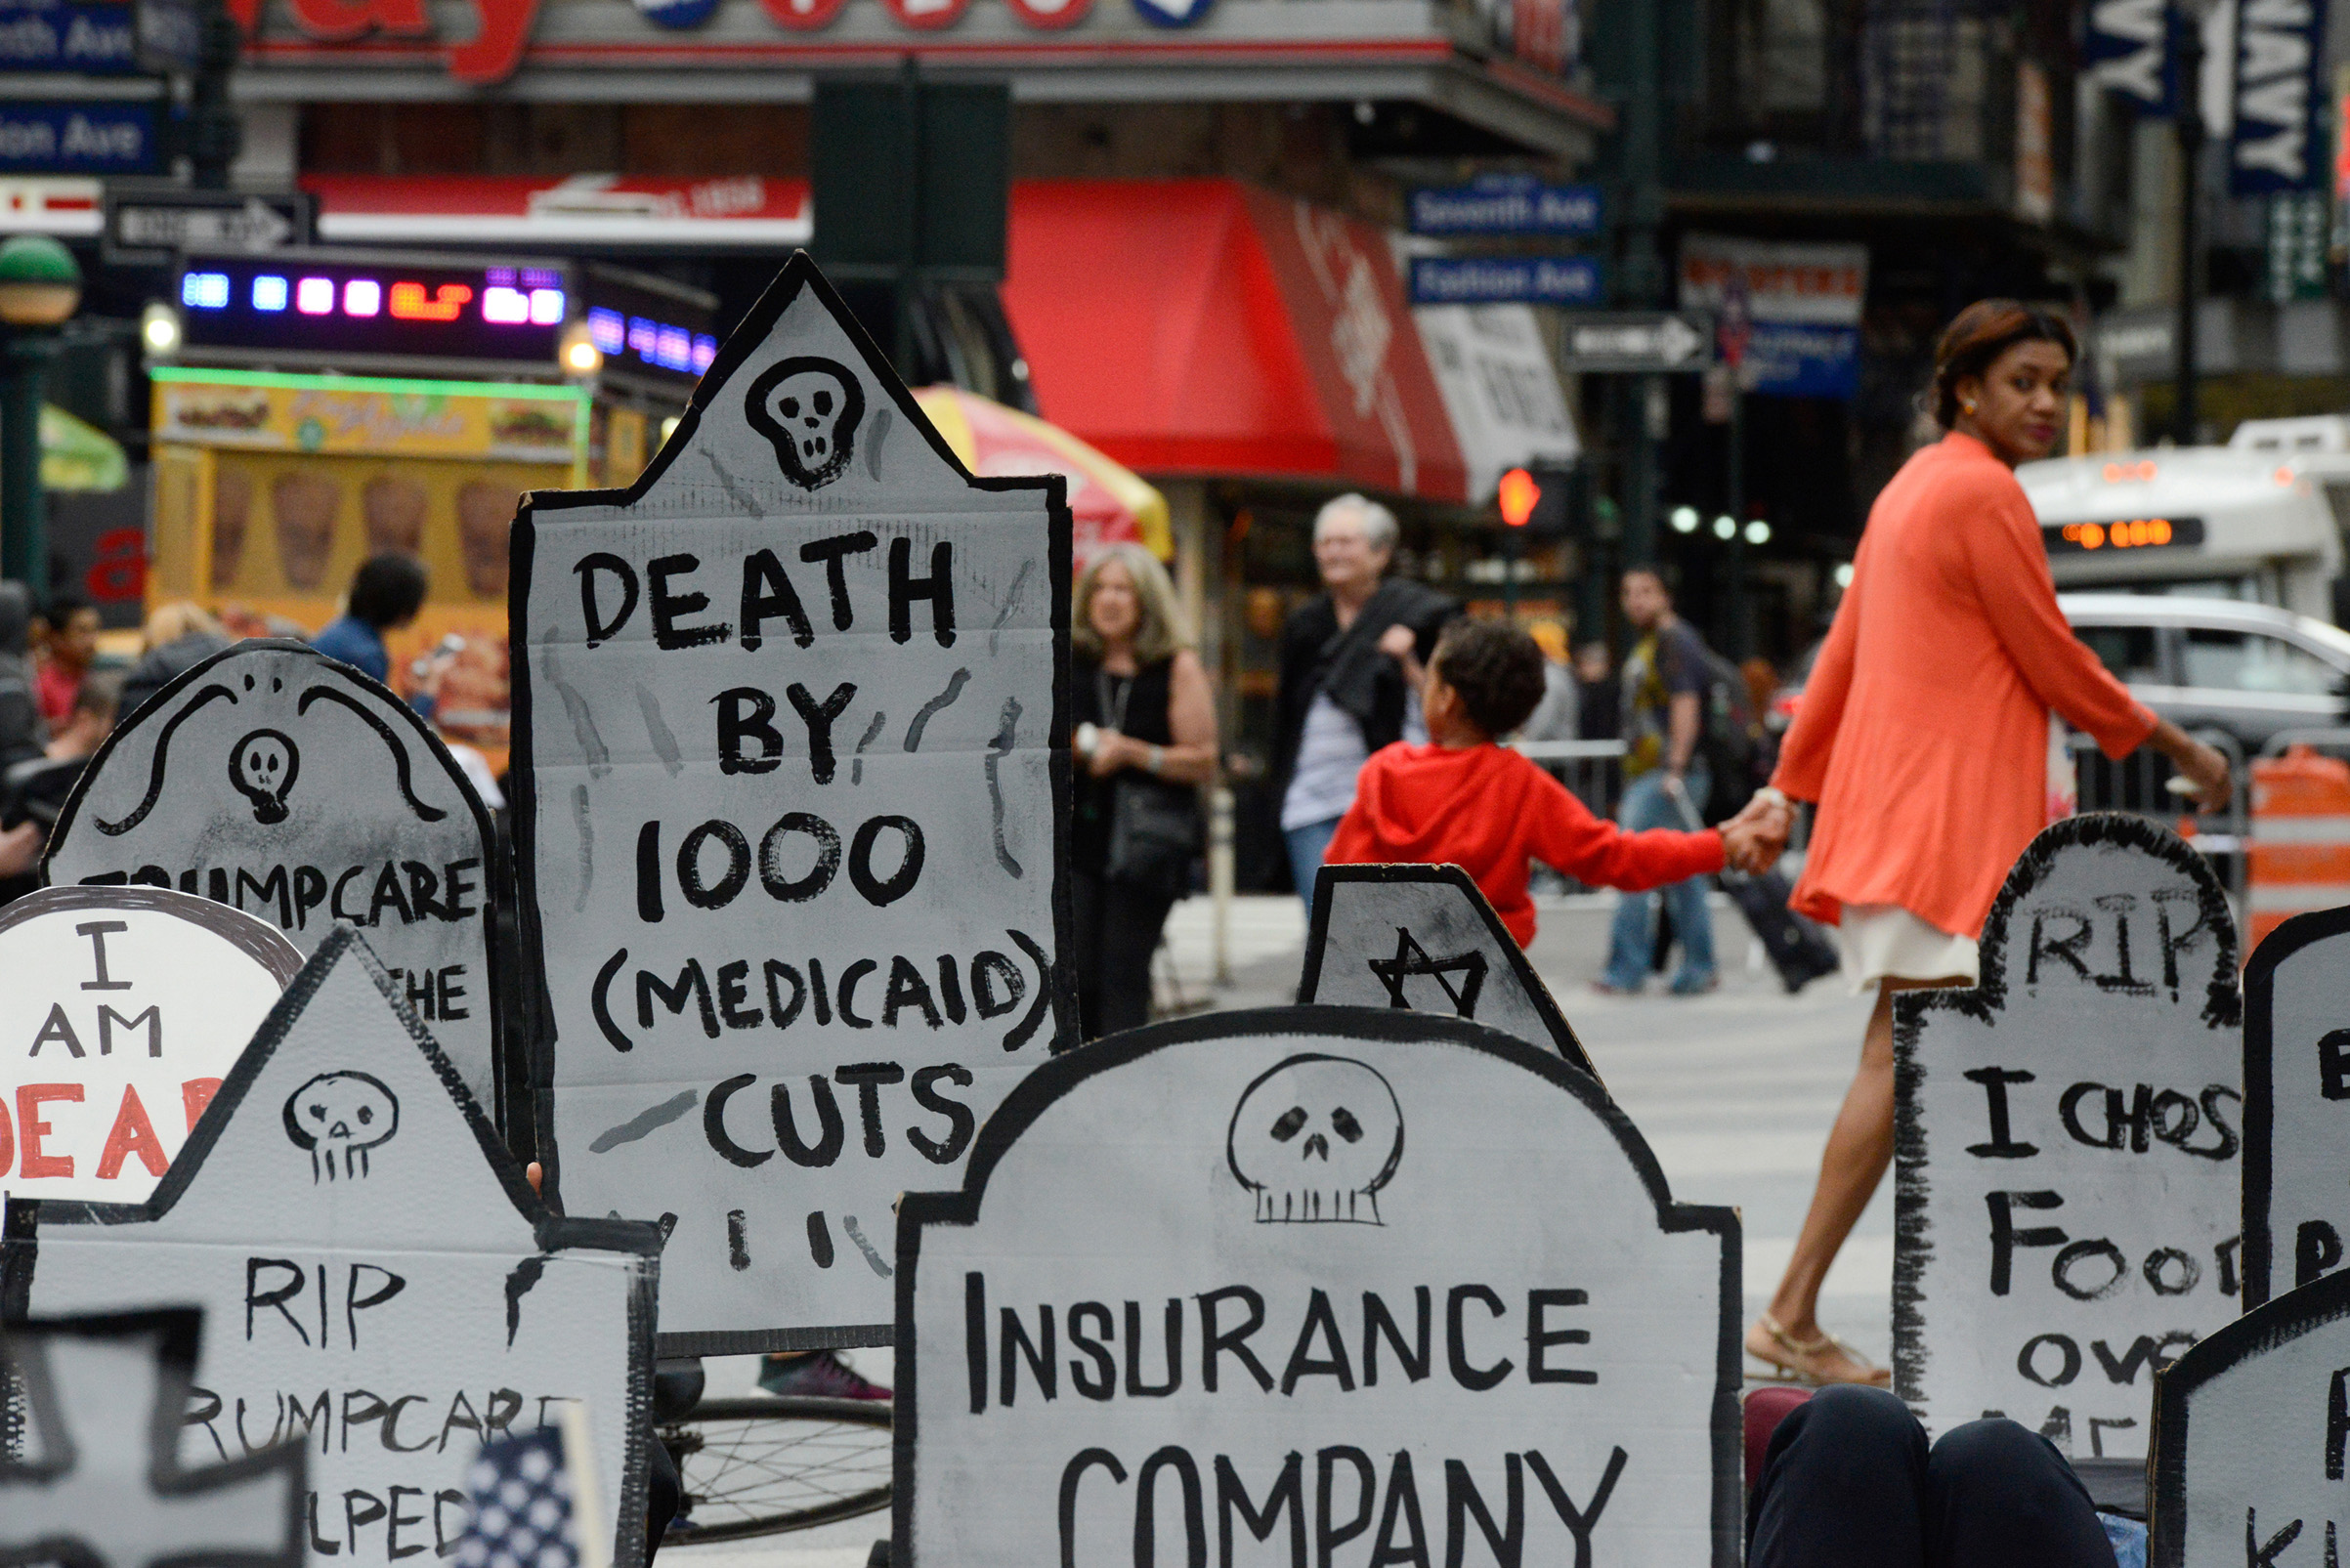 A protest of the Republican health care effort on June 4 in New York City. (Stephanie Keith—Reuters)